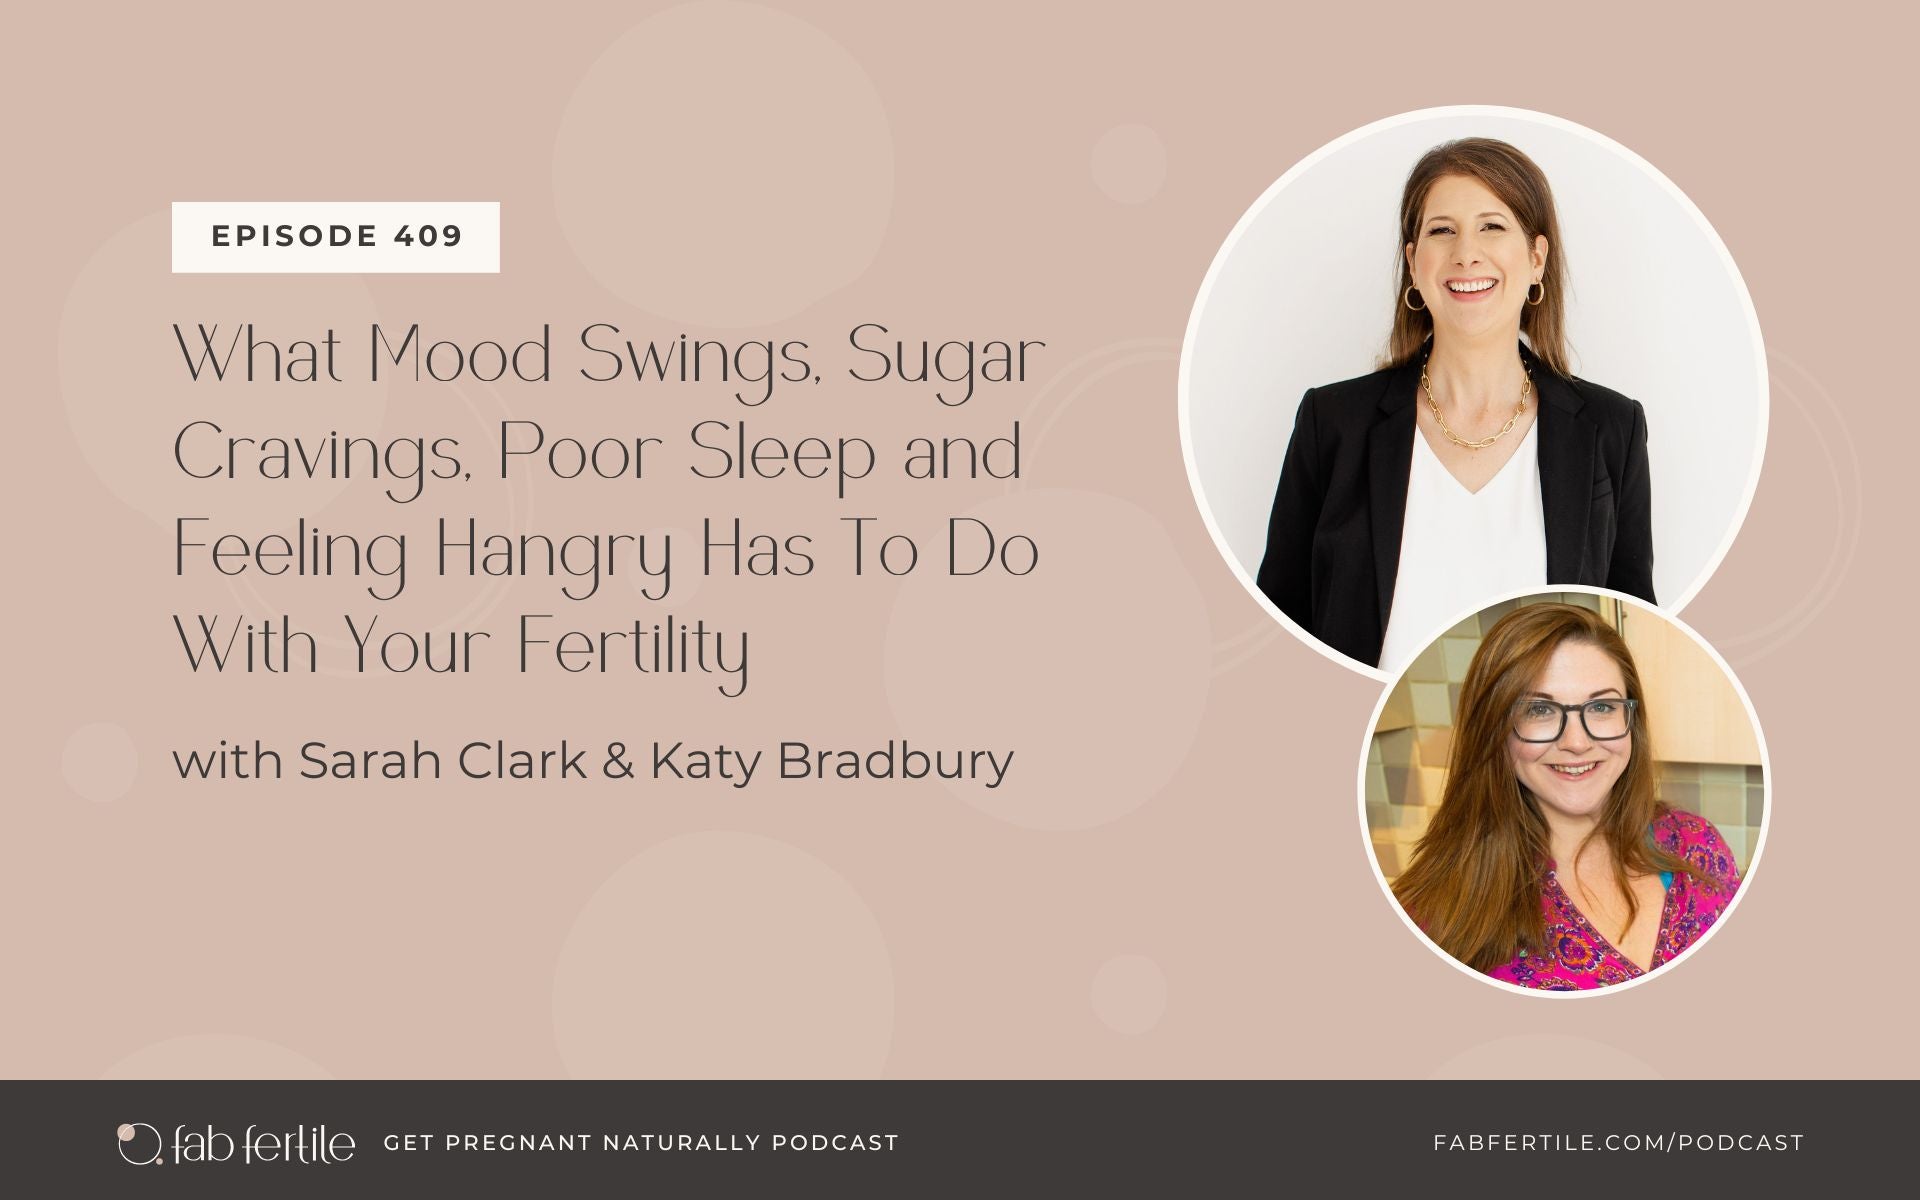 What Mood Swings, Sugar Cravings, Poor Sleep and Feeling Hangry Has To Do With Your Fertility